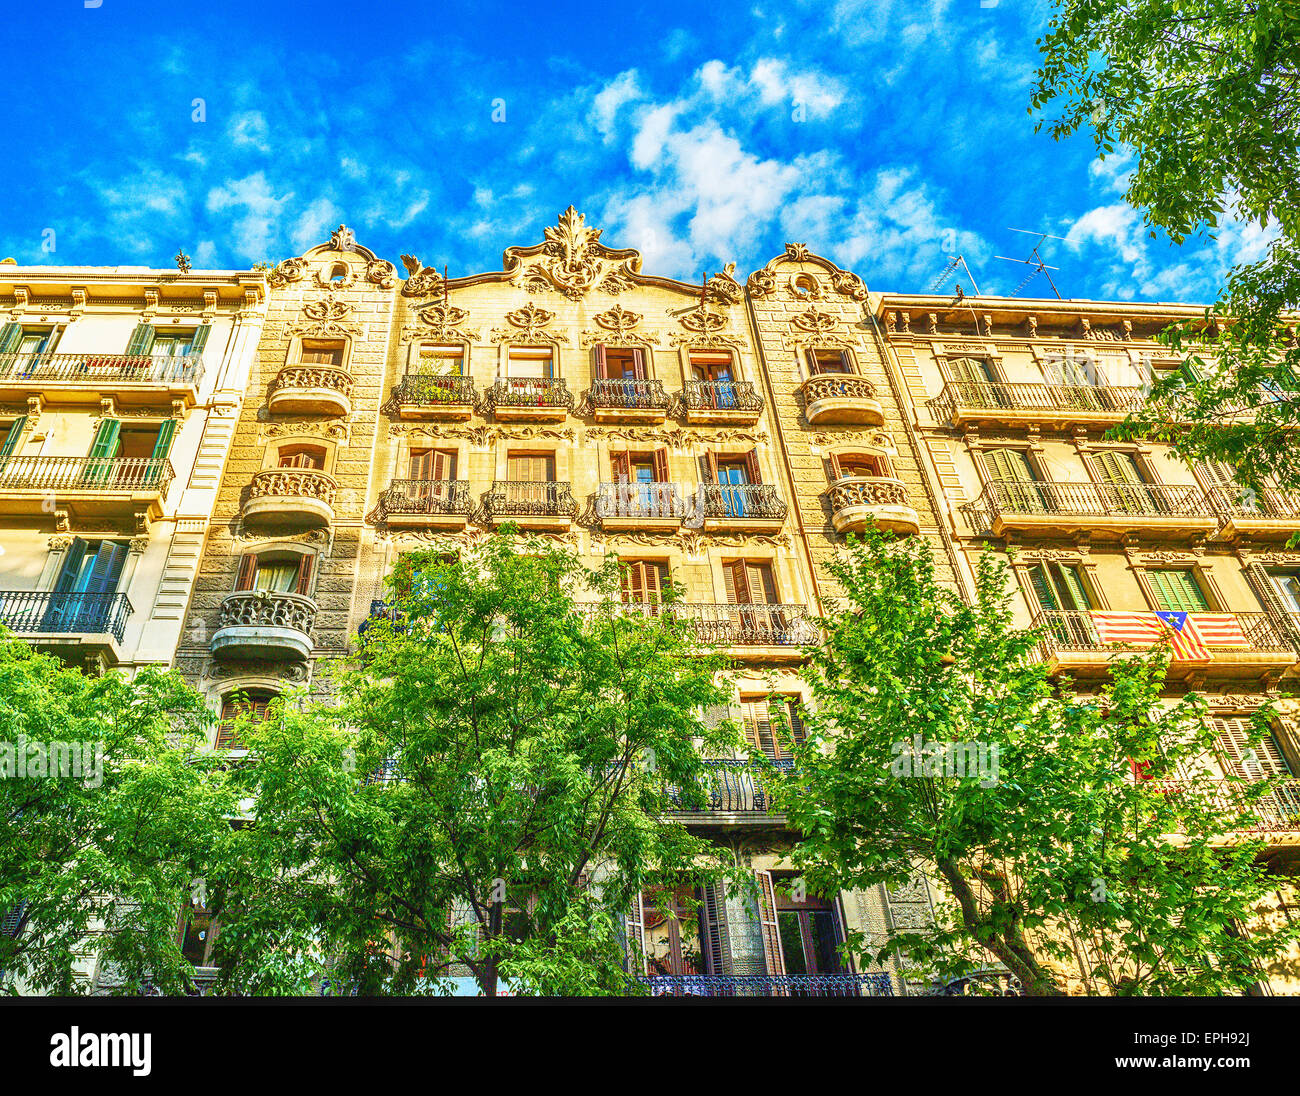 Facade of typical residential building in Eixample district, Barcelona ...